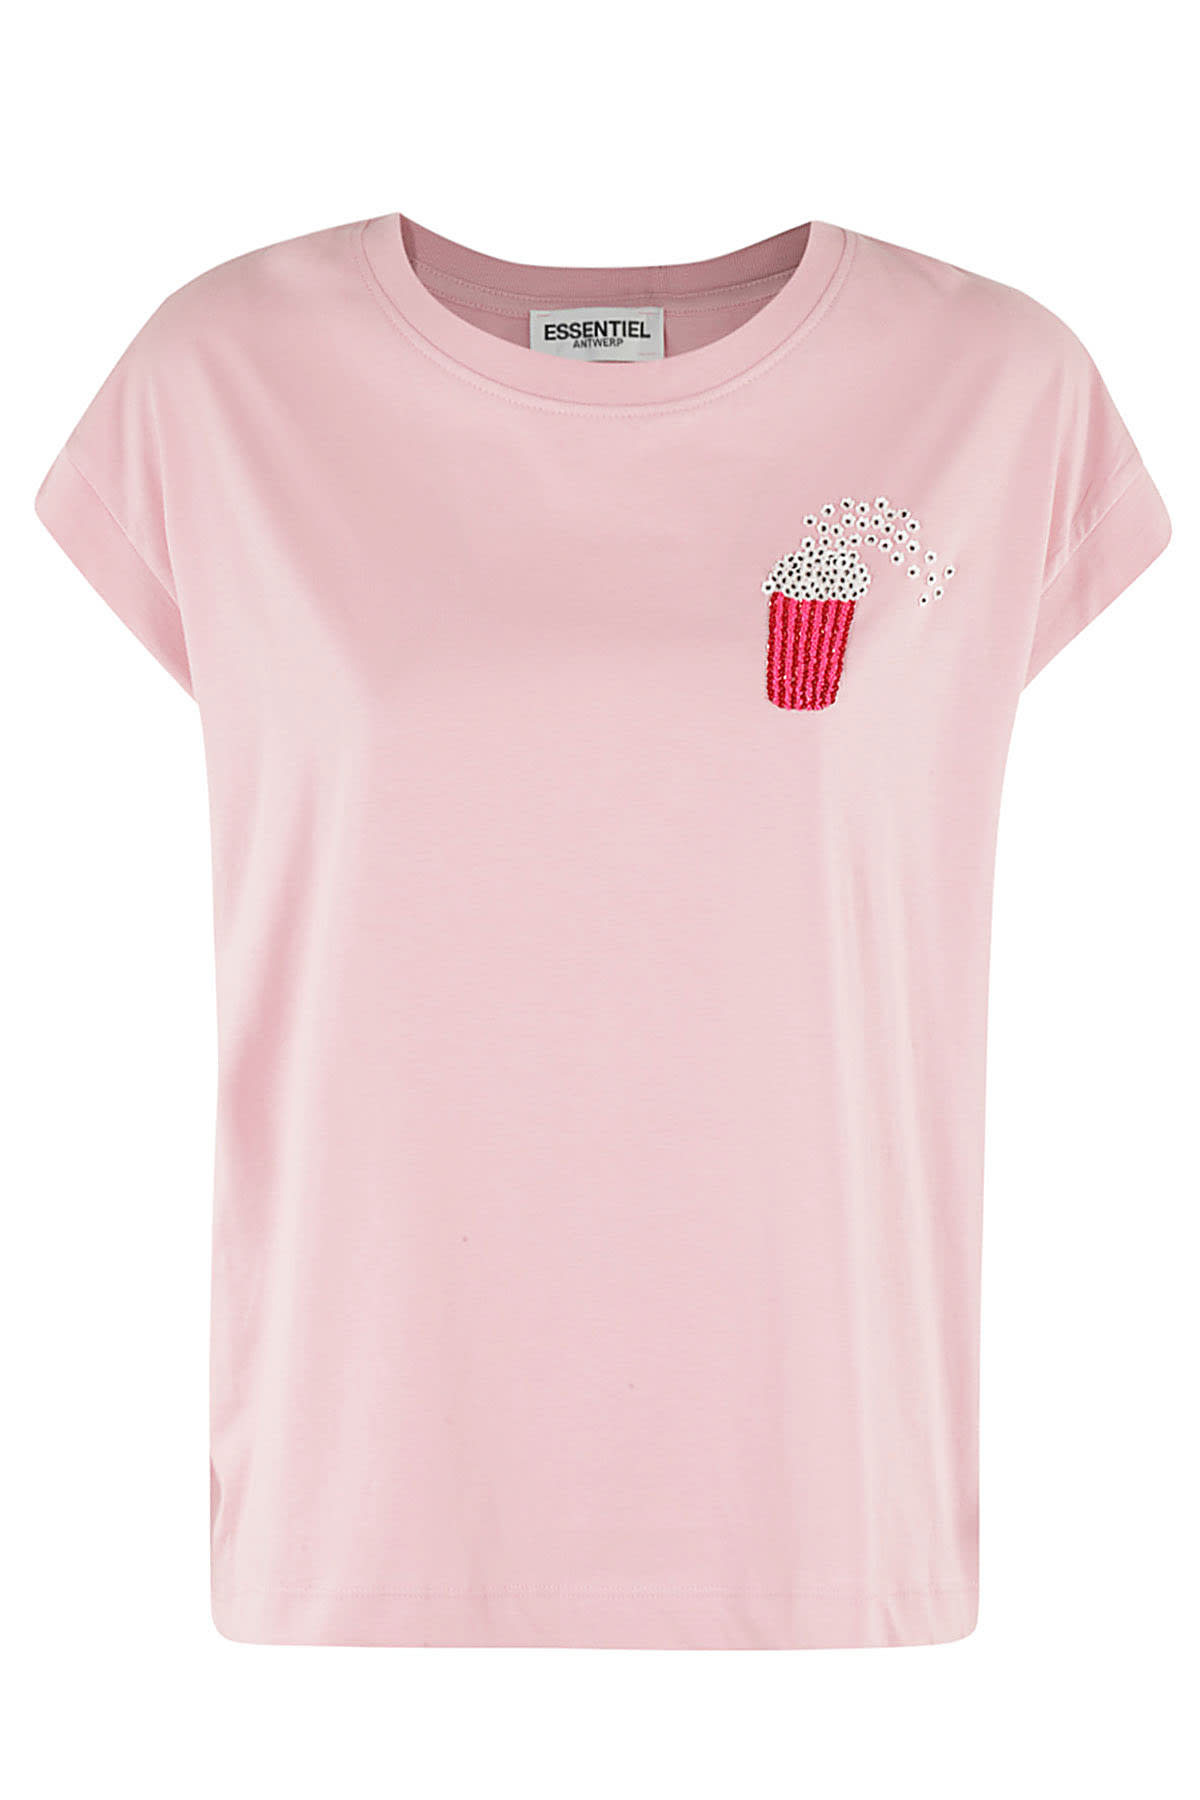 Essentiel Antwerp Faustina Embroidered T-shirt In Cl